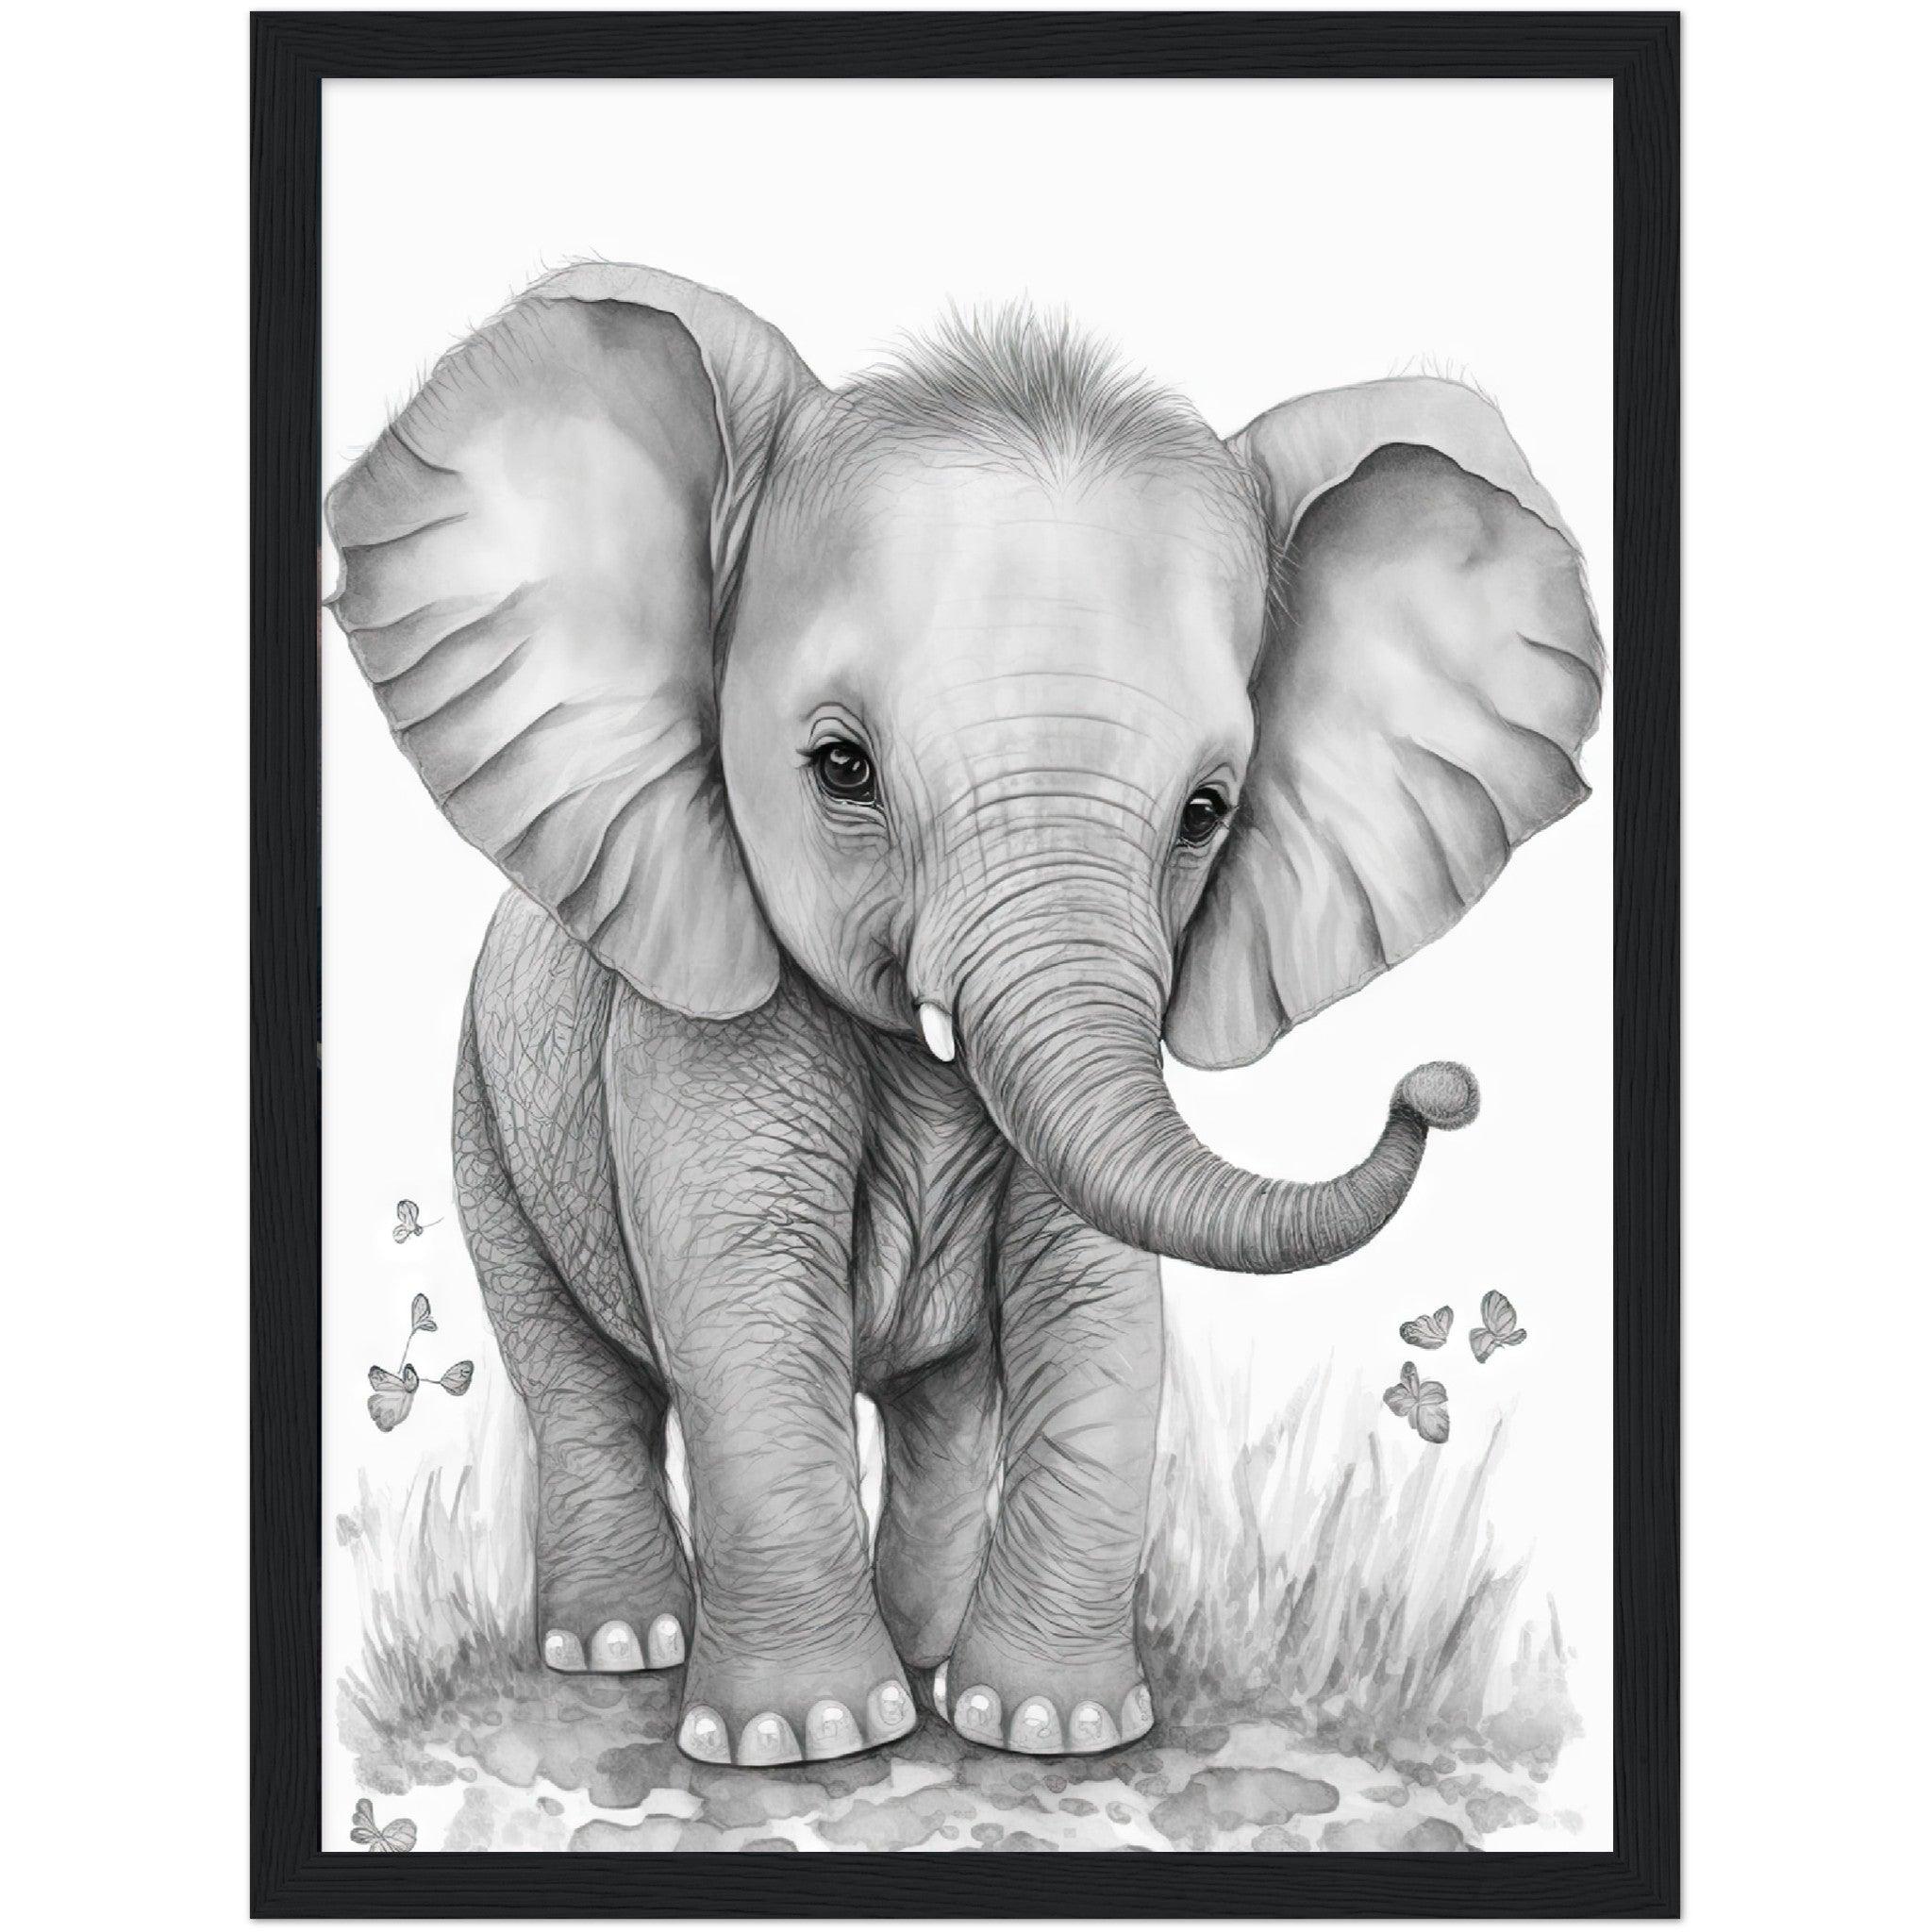 How to draw a cute Elephant by drawingartificer on DeviantArt